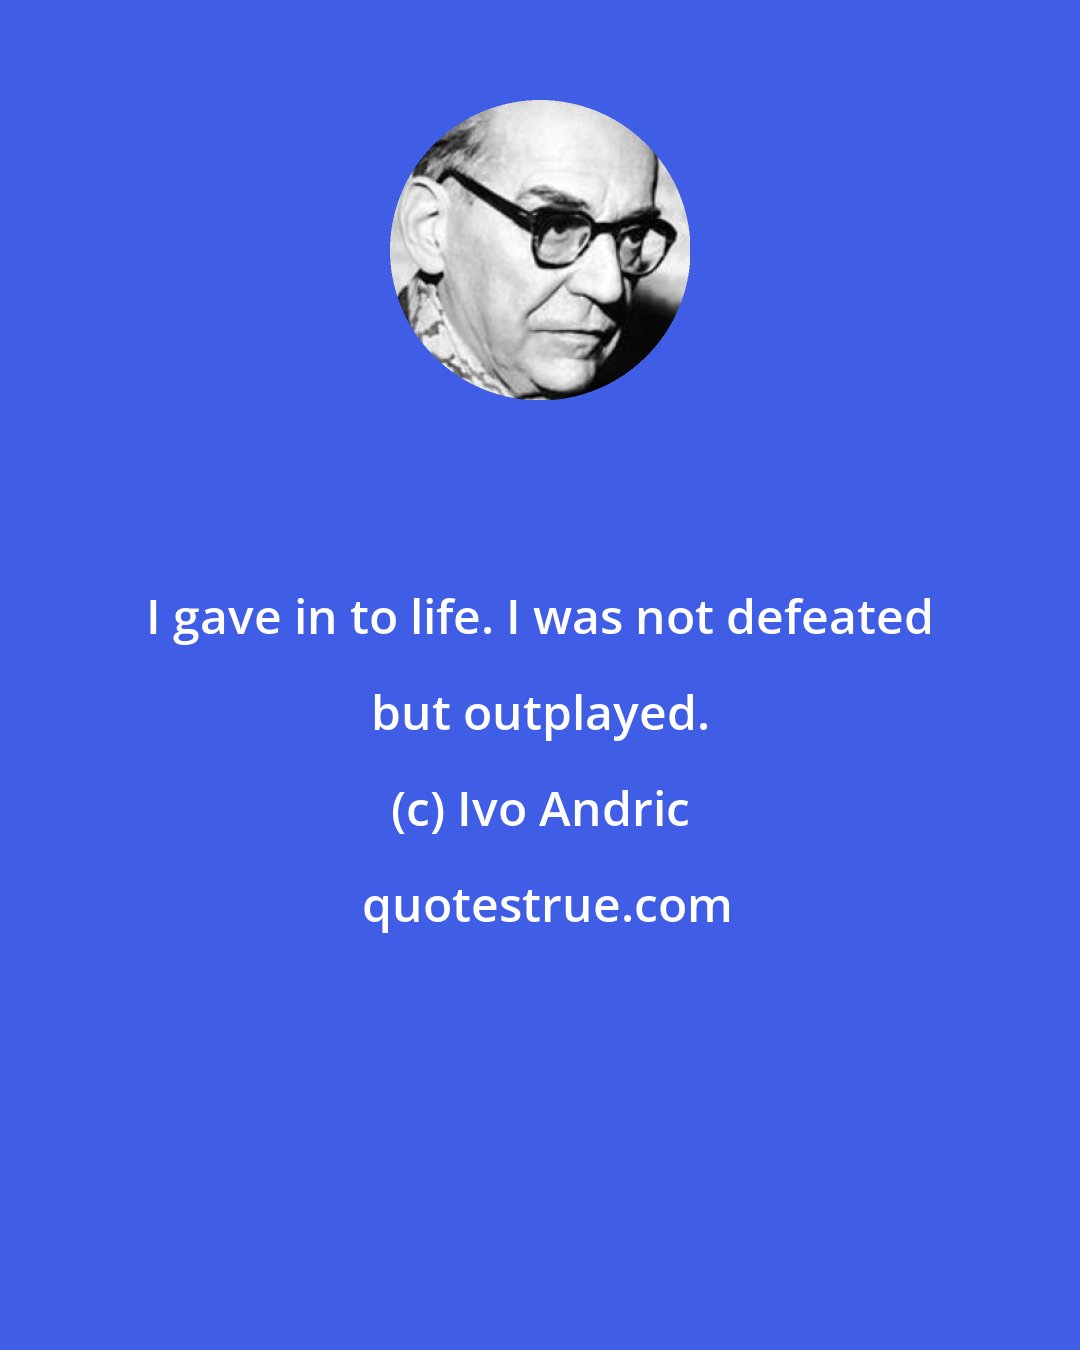 Ivo Andric: I gave in to life. I was not defeated but outplayed.